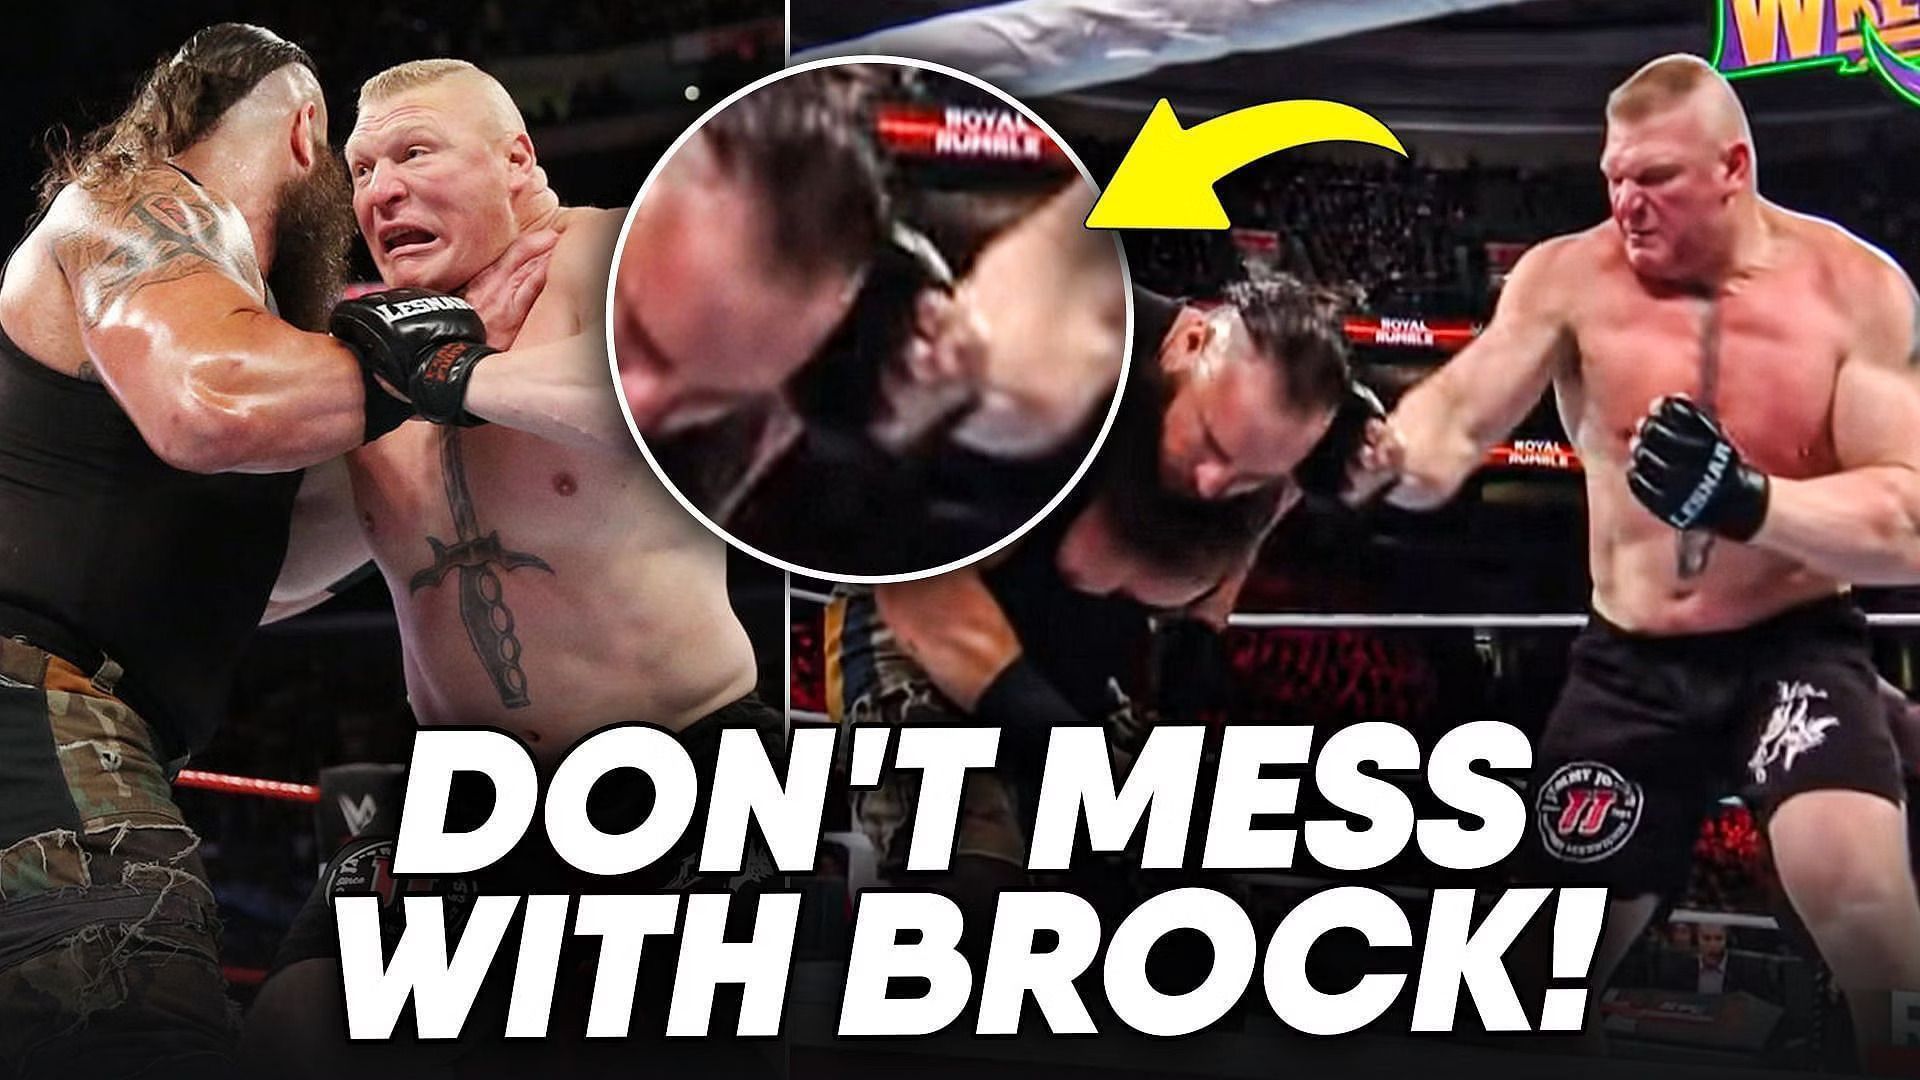 Brock Lesnar is a 10-time WWE world champion